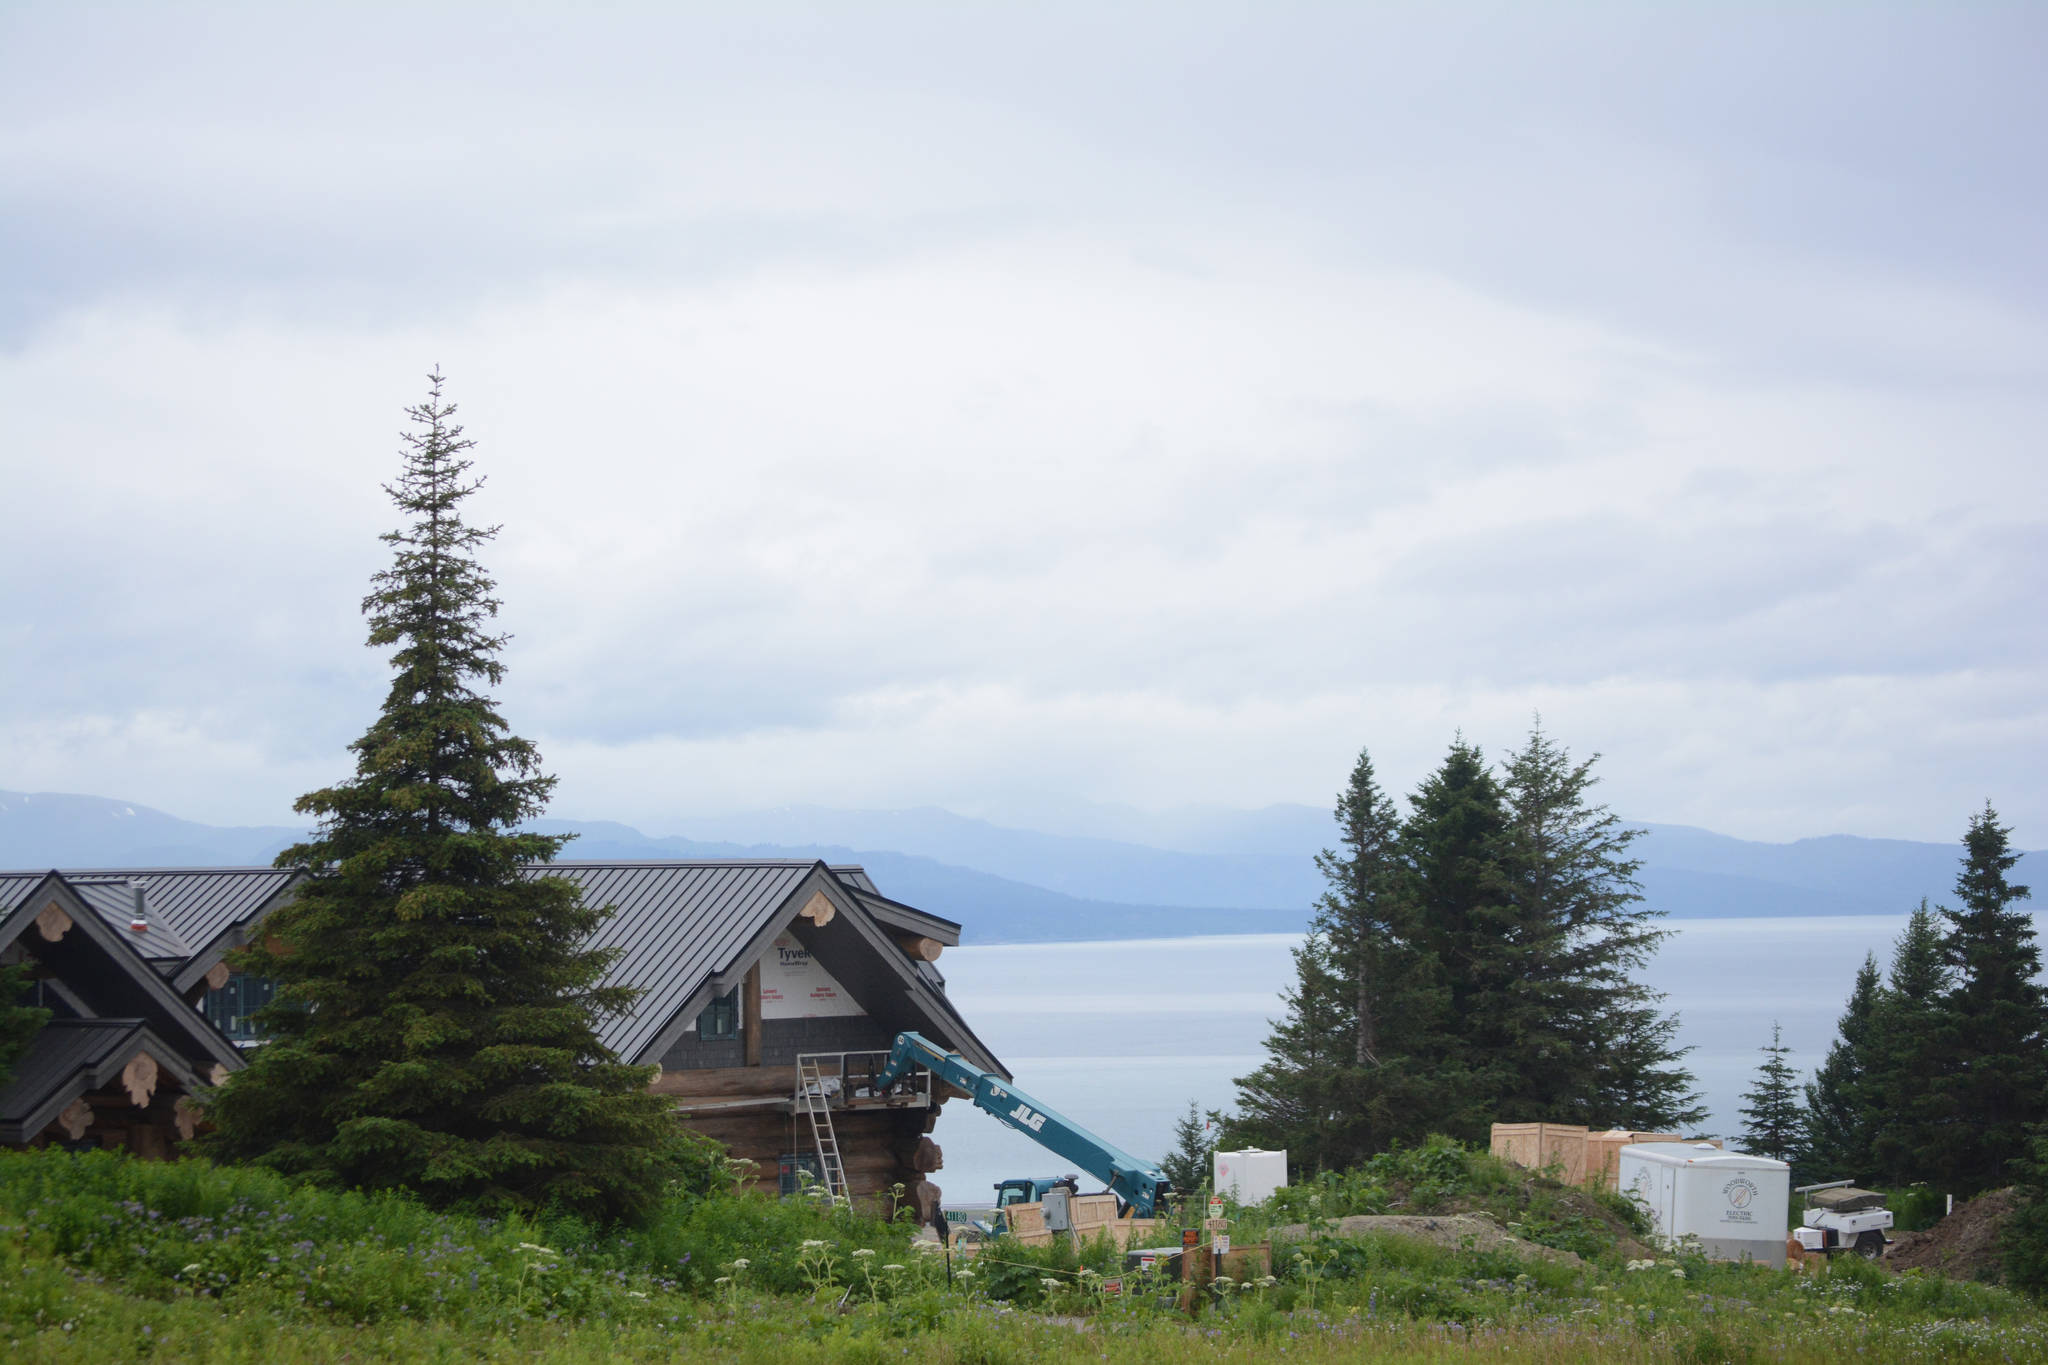 Part of country-western singer Zac Brown’s log home is visible from Dorothy Drive overlooking Kachemak Bay in Homer, Alaska. The home is under construction with on-site security and marked no trespassing. Brown and other neighbors at the end of the rural road plan to vacate the last 2,000 feet and turn it into a private, gated road. After this photo was taken on July 9, 2018, signs went up saying “road closed for local traffic.” (Photo by Michael Armstrong/Homer News)